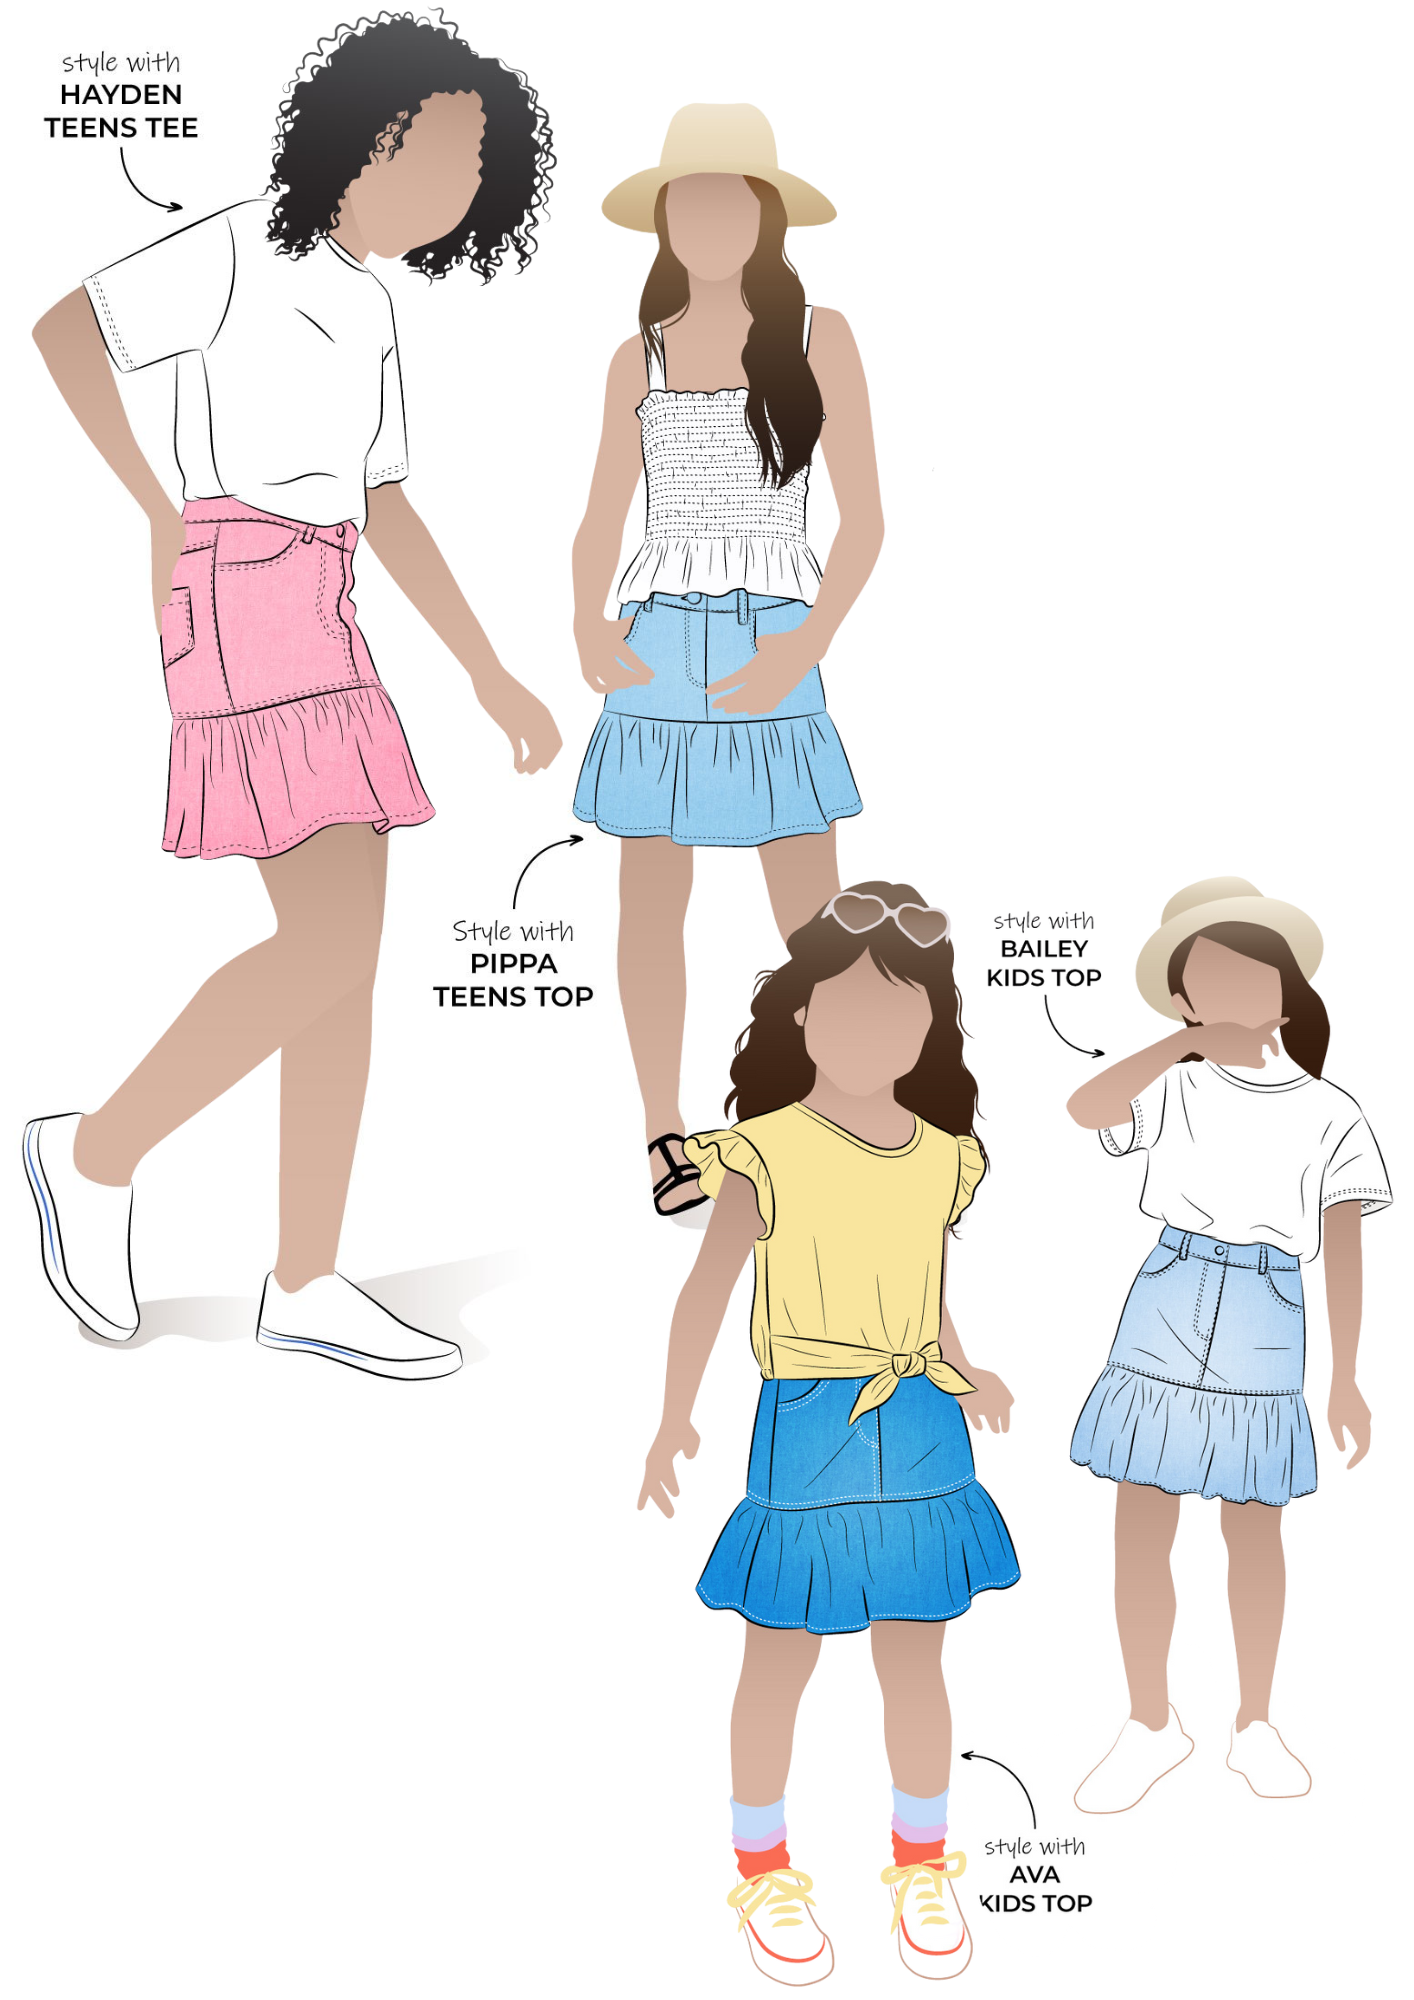 Style Arc's latest pattern release: Etta Kids and Teens Skirt - available to purchase in Kids sizing 02-08 or Teens sizing -8-16